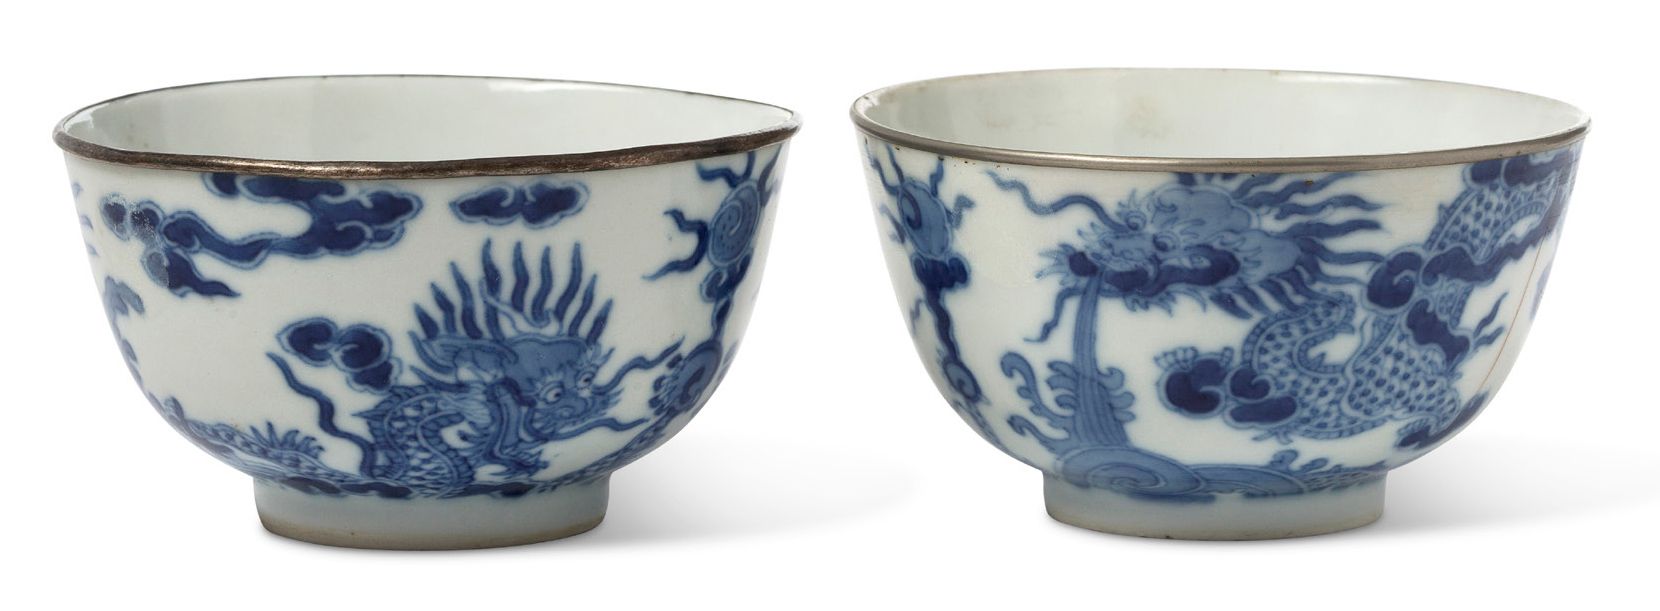 VIETNAM MILIEU XIXE SIÈCLE 
Pair of small blue-white bowls with metal rings, dec&hellip;